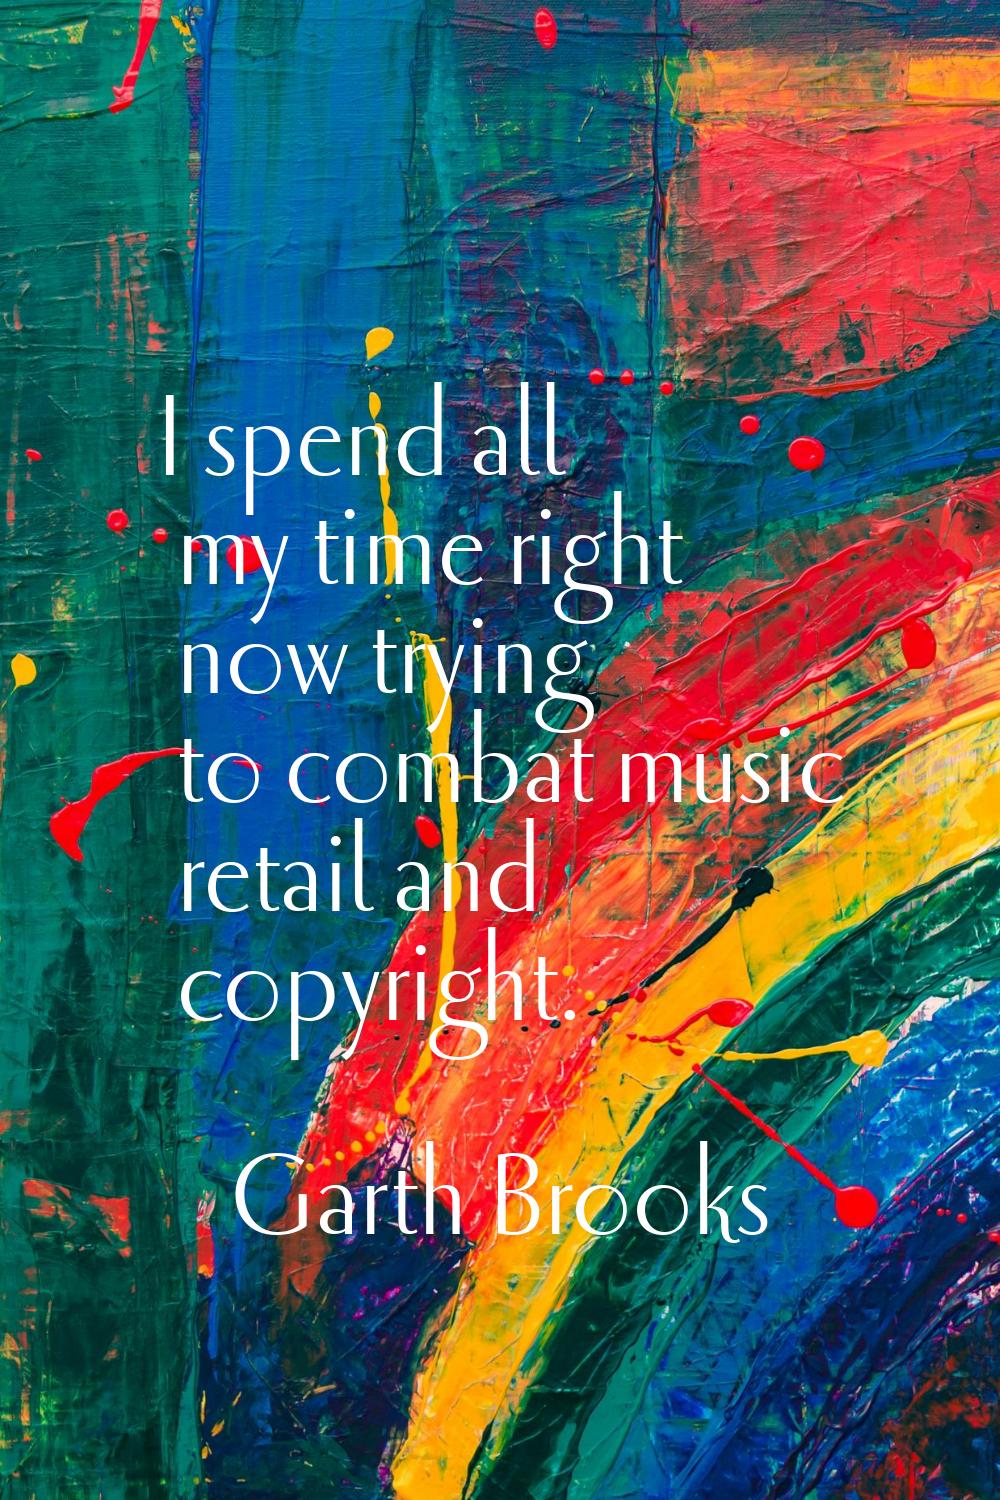 I spend all my time right now trying to combat music retail and copyright.